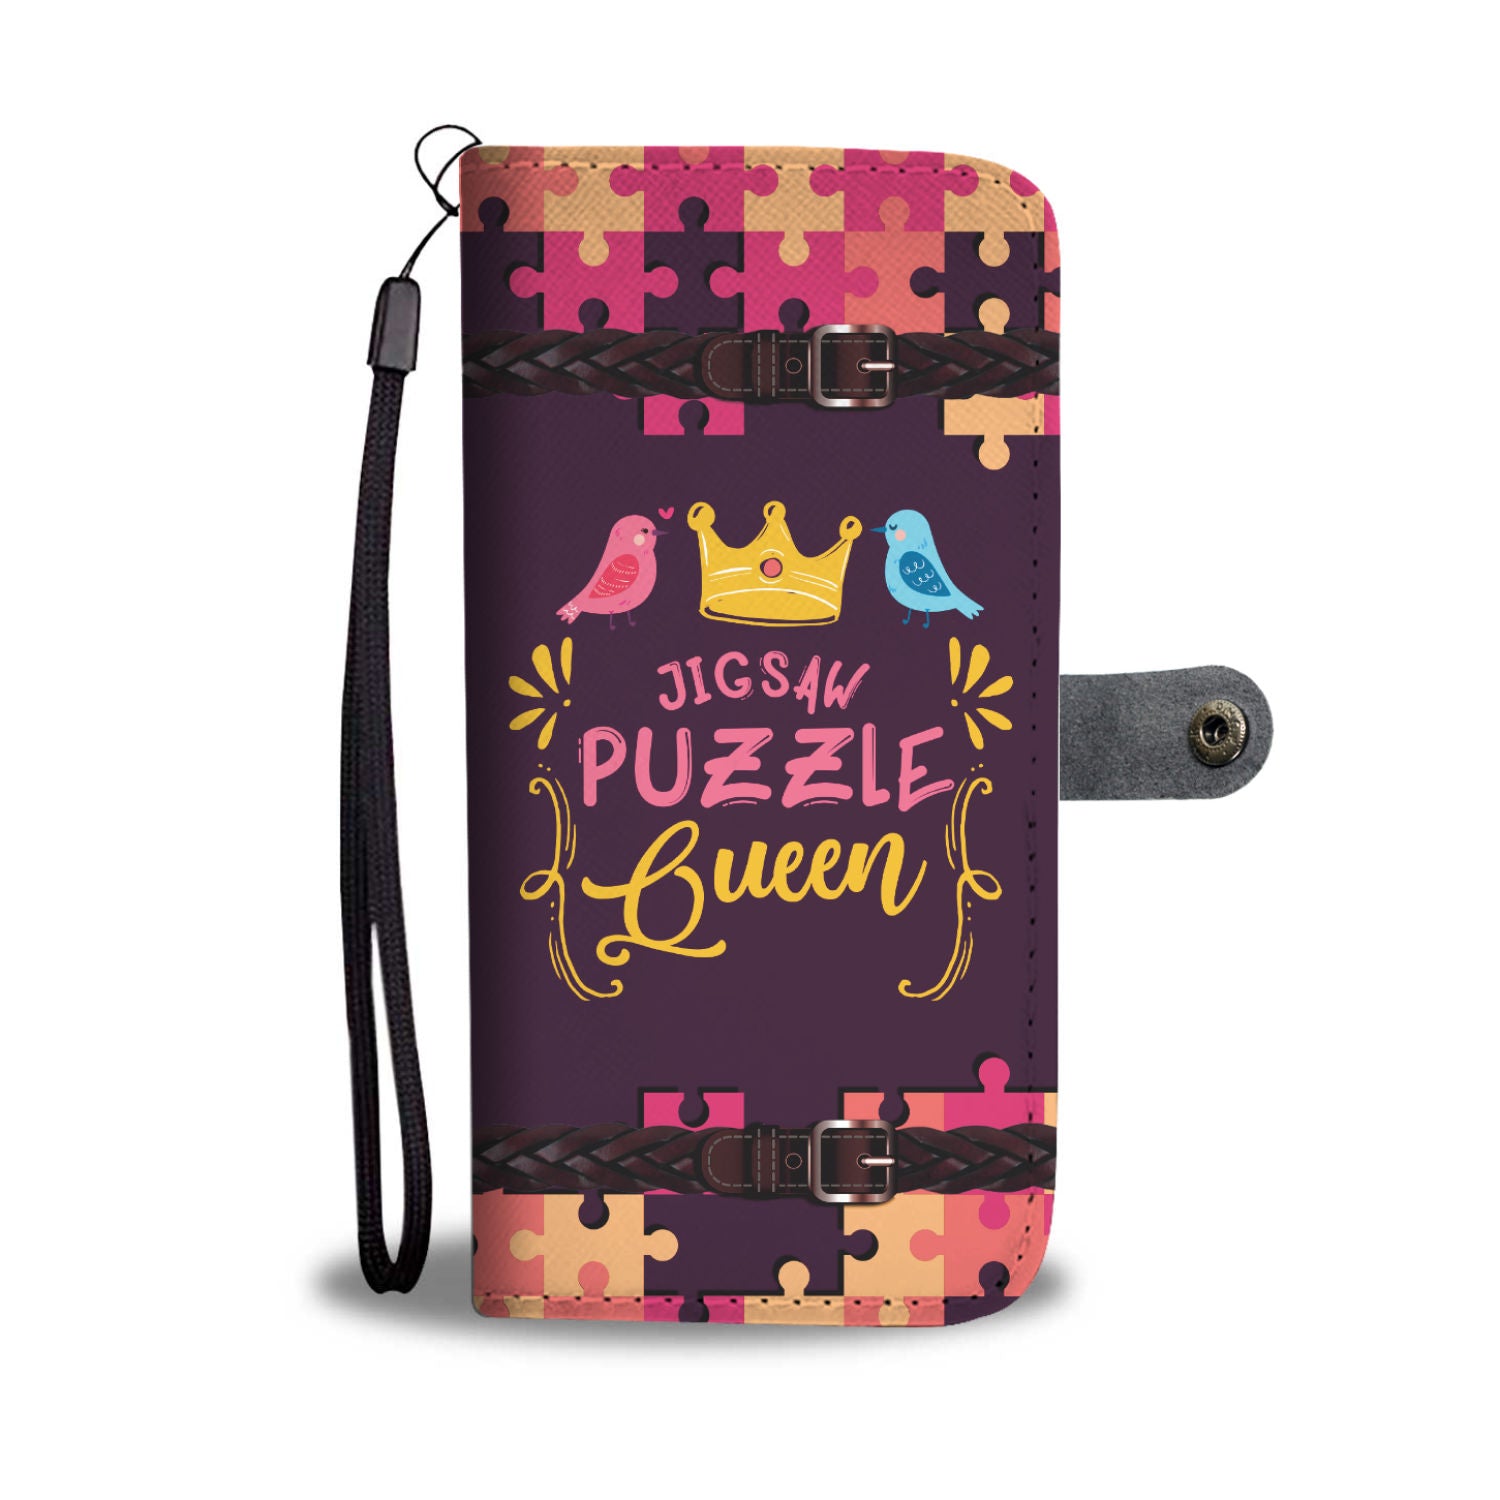 Jigsaw Puzzle Queen Phone Wallet Case